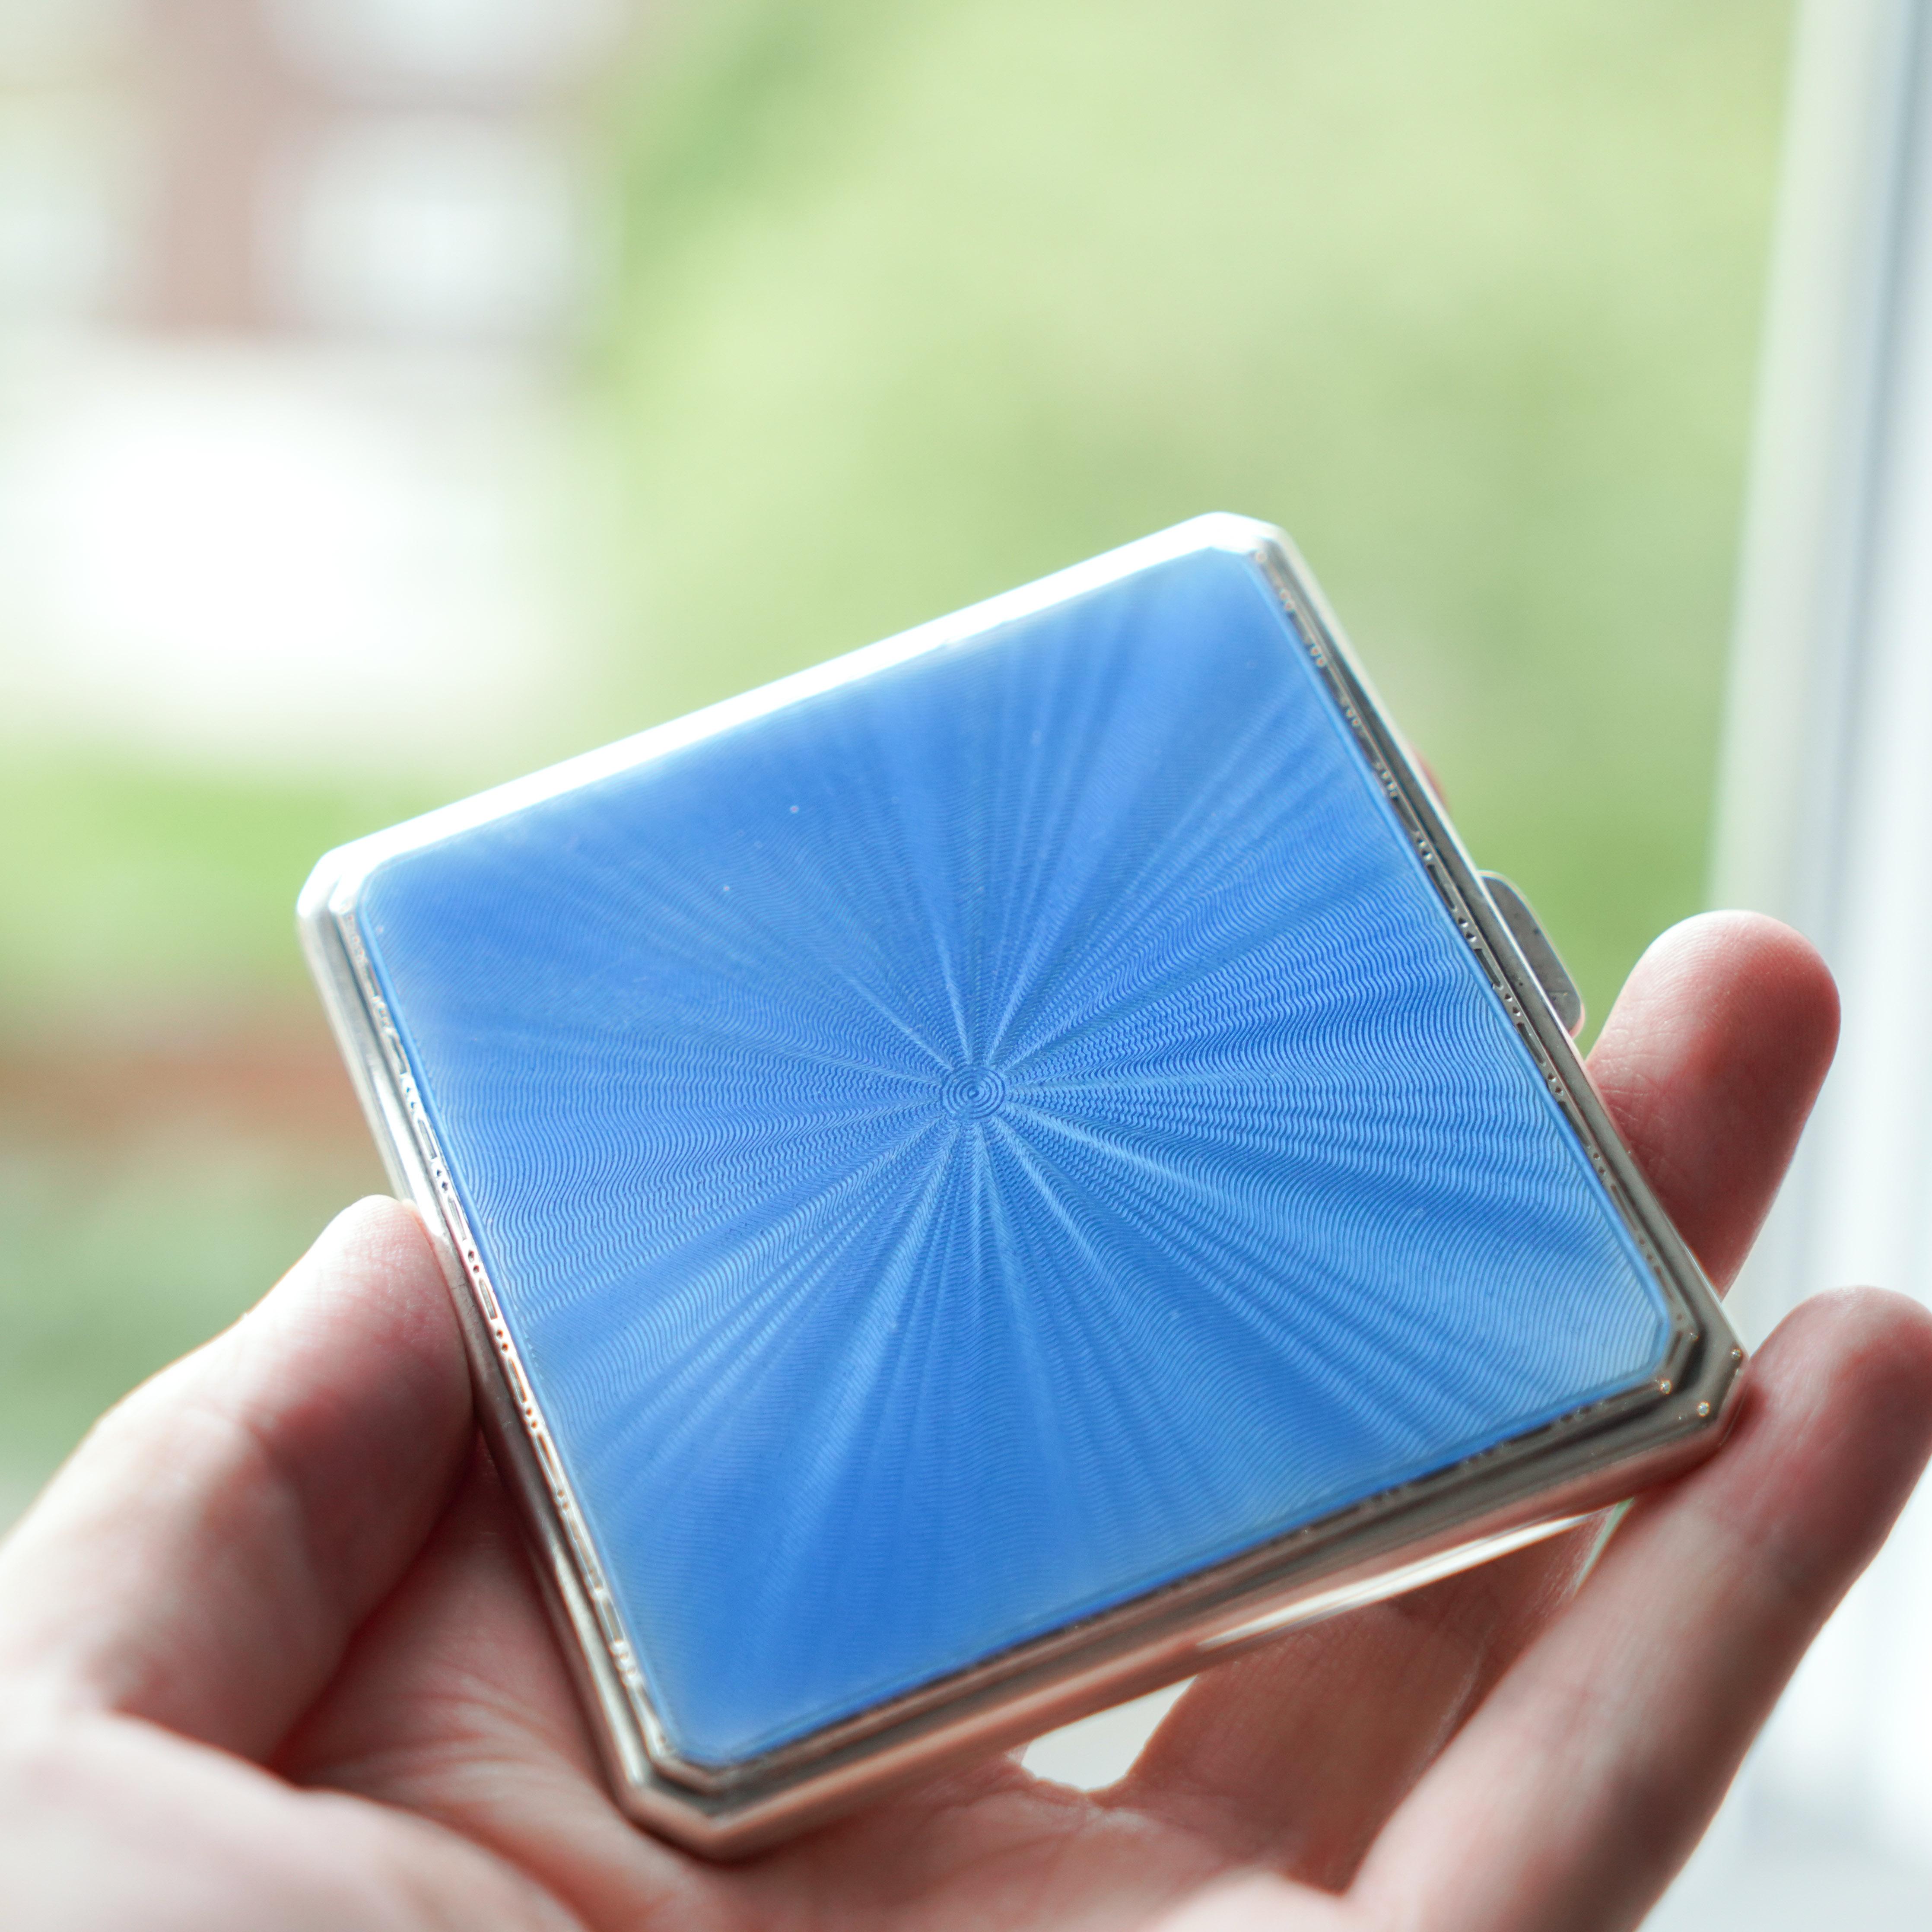 We are delighted to offer this stunning sunburst light blue enamel and sterling silver cigarette case, made by A E Poston & Co Ltd in Birmingham 1937.
  
With practicality, elegance and style combined in one, this cigarette case is the perfect